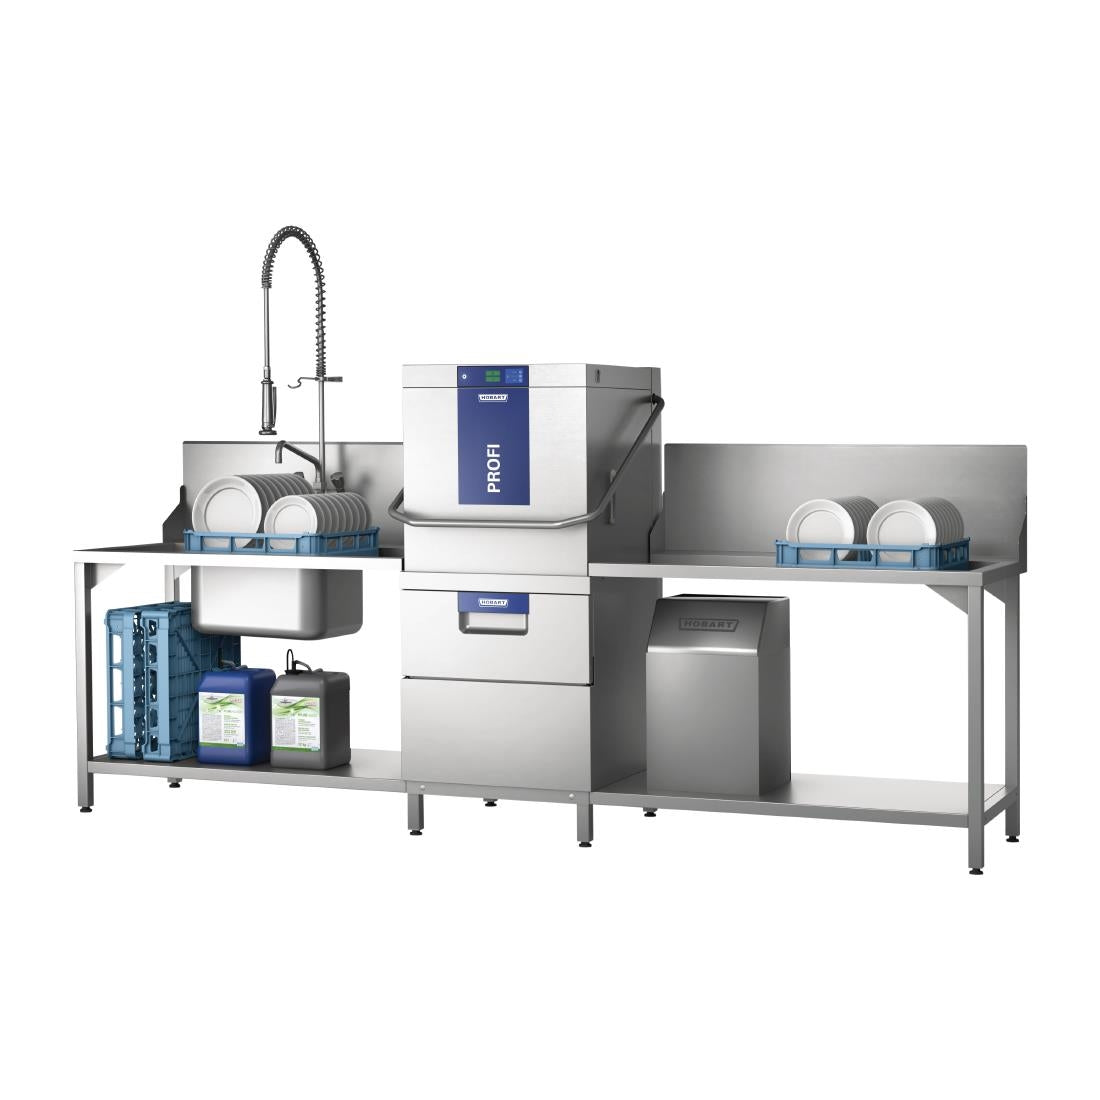 FE668 Hobart Profi Dual Level Pass Through Dishwasher TLWW-10A with Integral Softener JD Catering Equipment Solutions Ltd